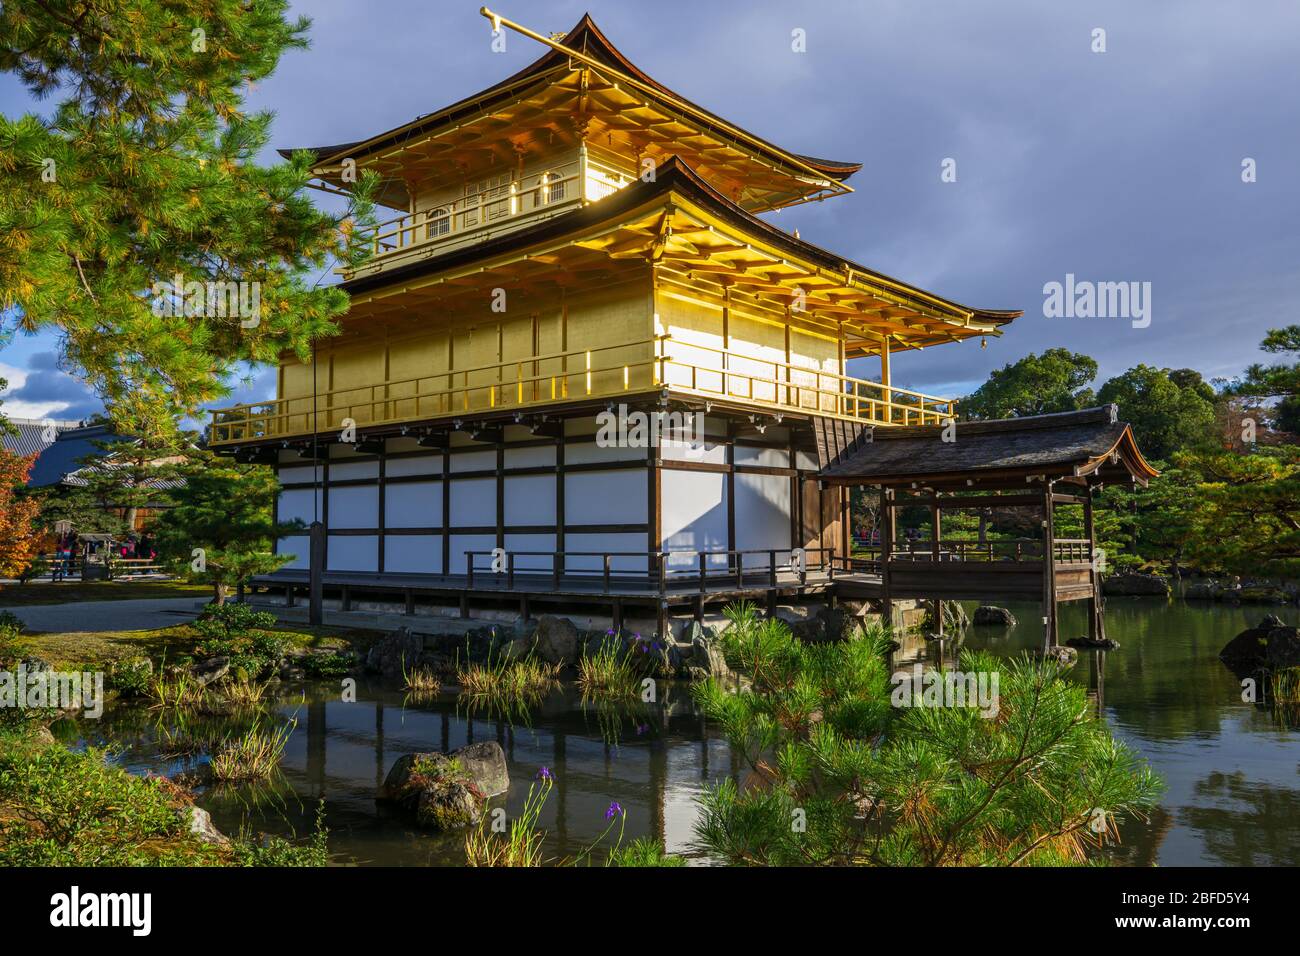 Kinkakuji Zen Buddhist Temple is an impressive structure built overlooking a large pond, known as a retirement complex. Stock Photo